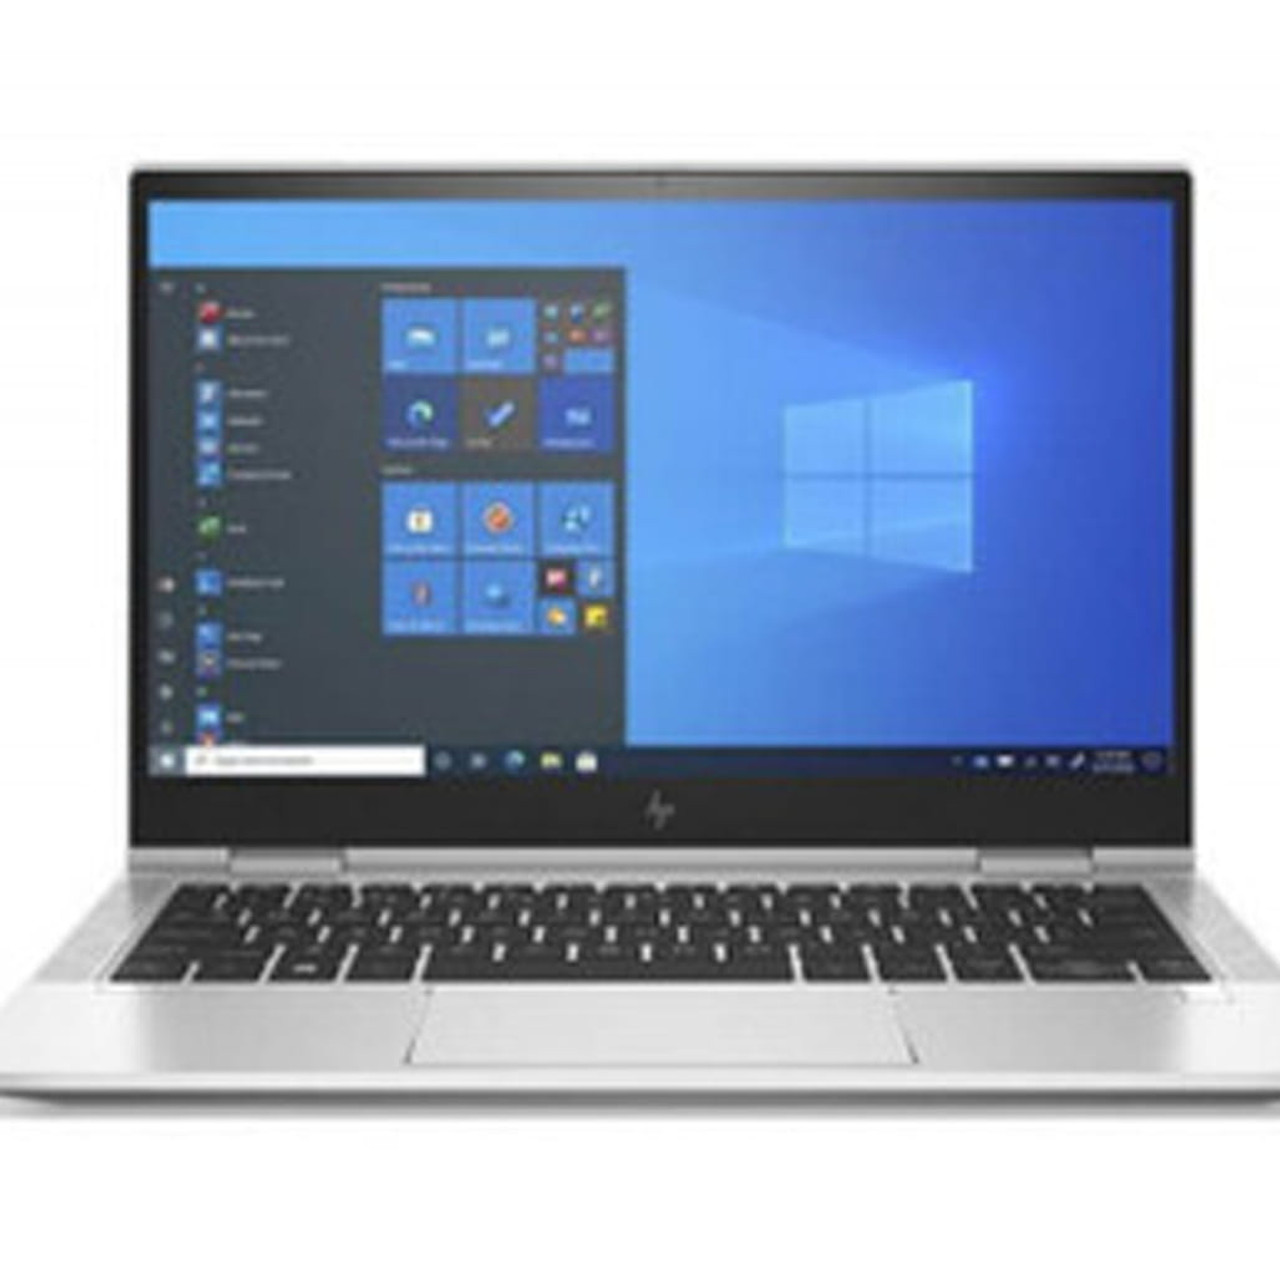 [TOUCH] HP Elitebook x360 1030, Core i7-1165G7,8GB,256GB SSD,13.3" FHD Touch,LTE 4G,Win10 Pro,3Yr	, 5 Year Tech Support + Bonus Pack